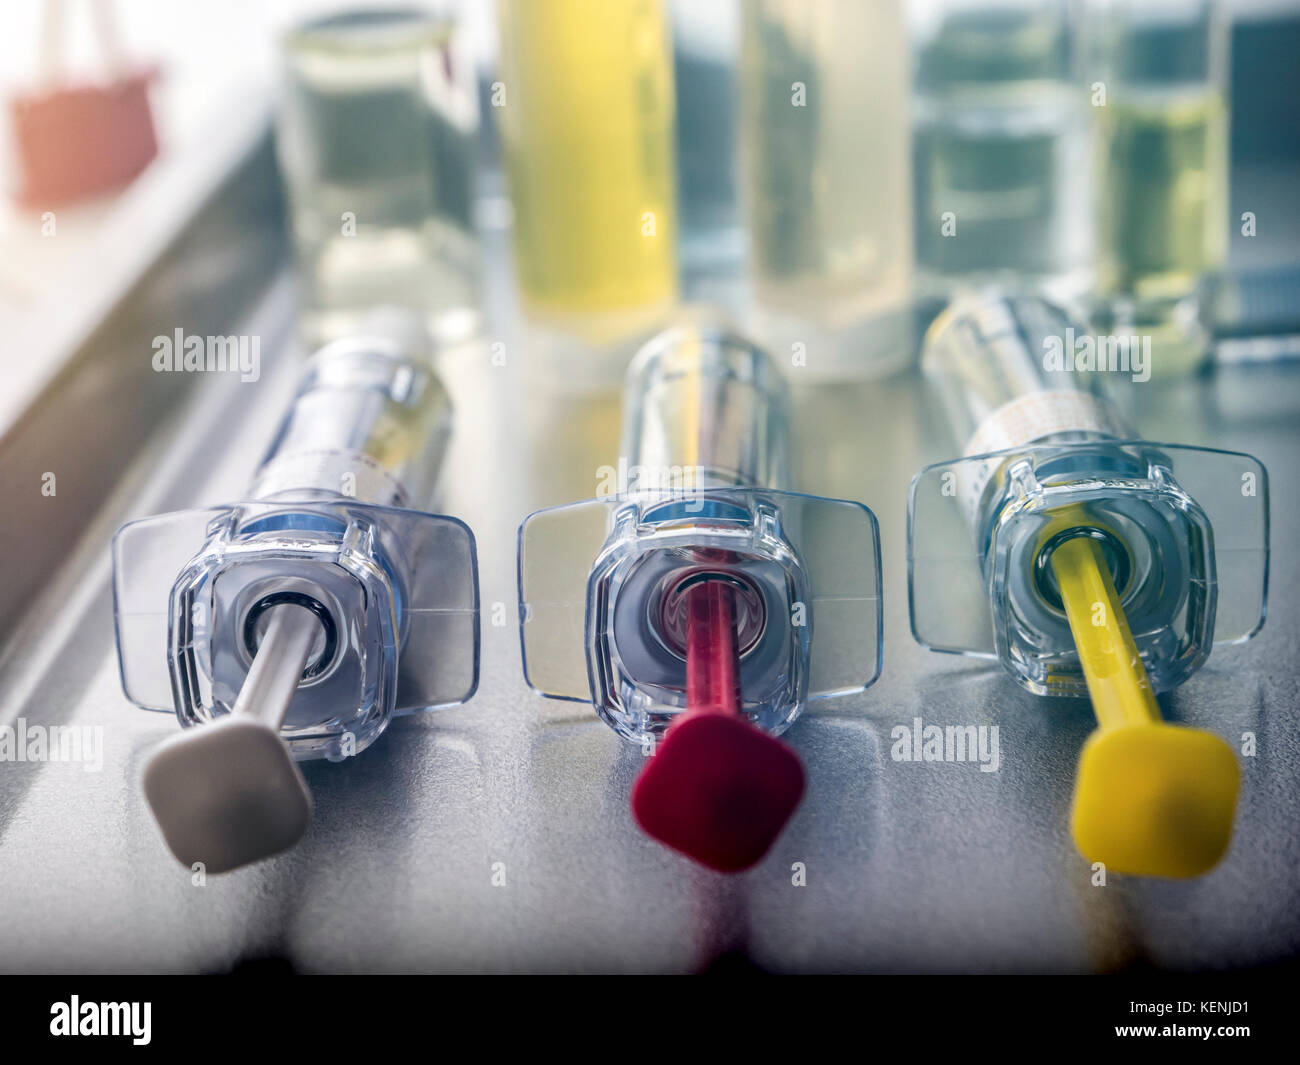 Several vials and syringe in laboratory, conceptual image Stock Photo